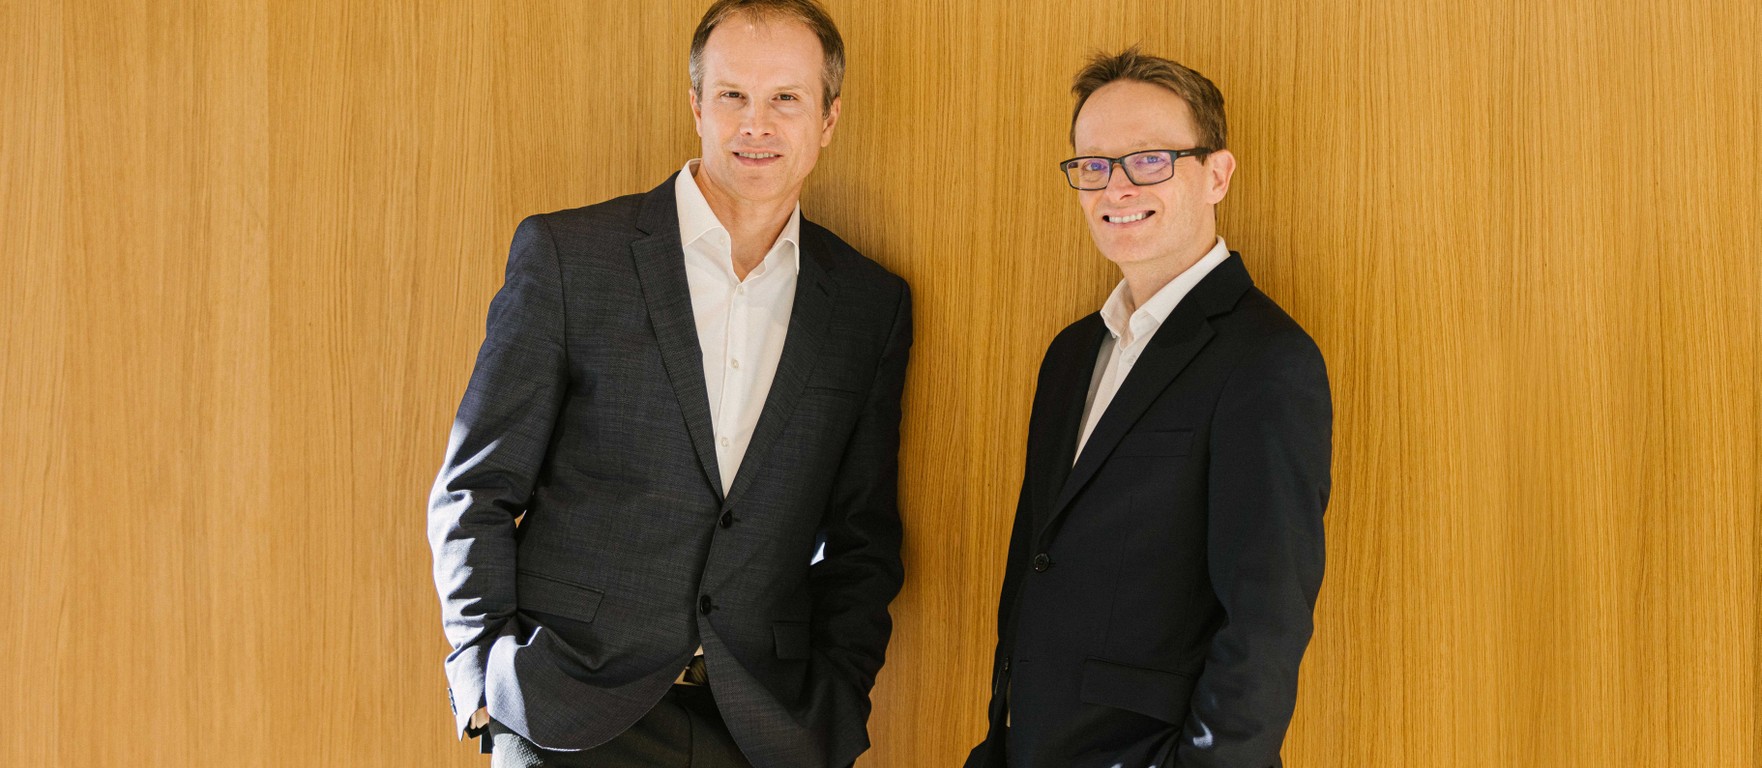 Former Grayling Directors launch consultancy in Central & Eastern Europe